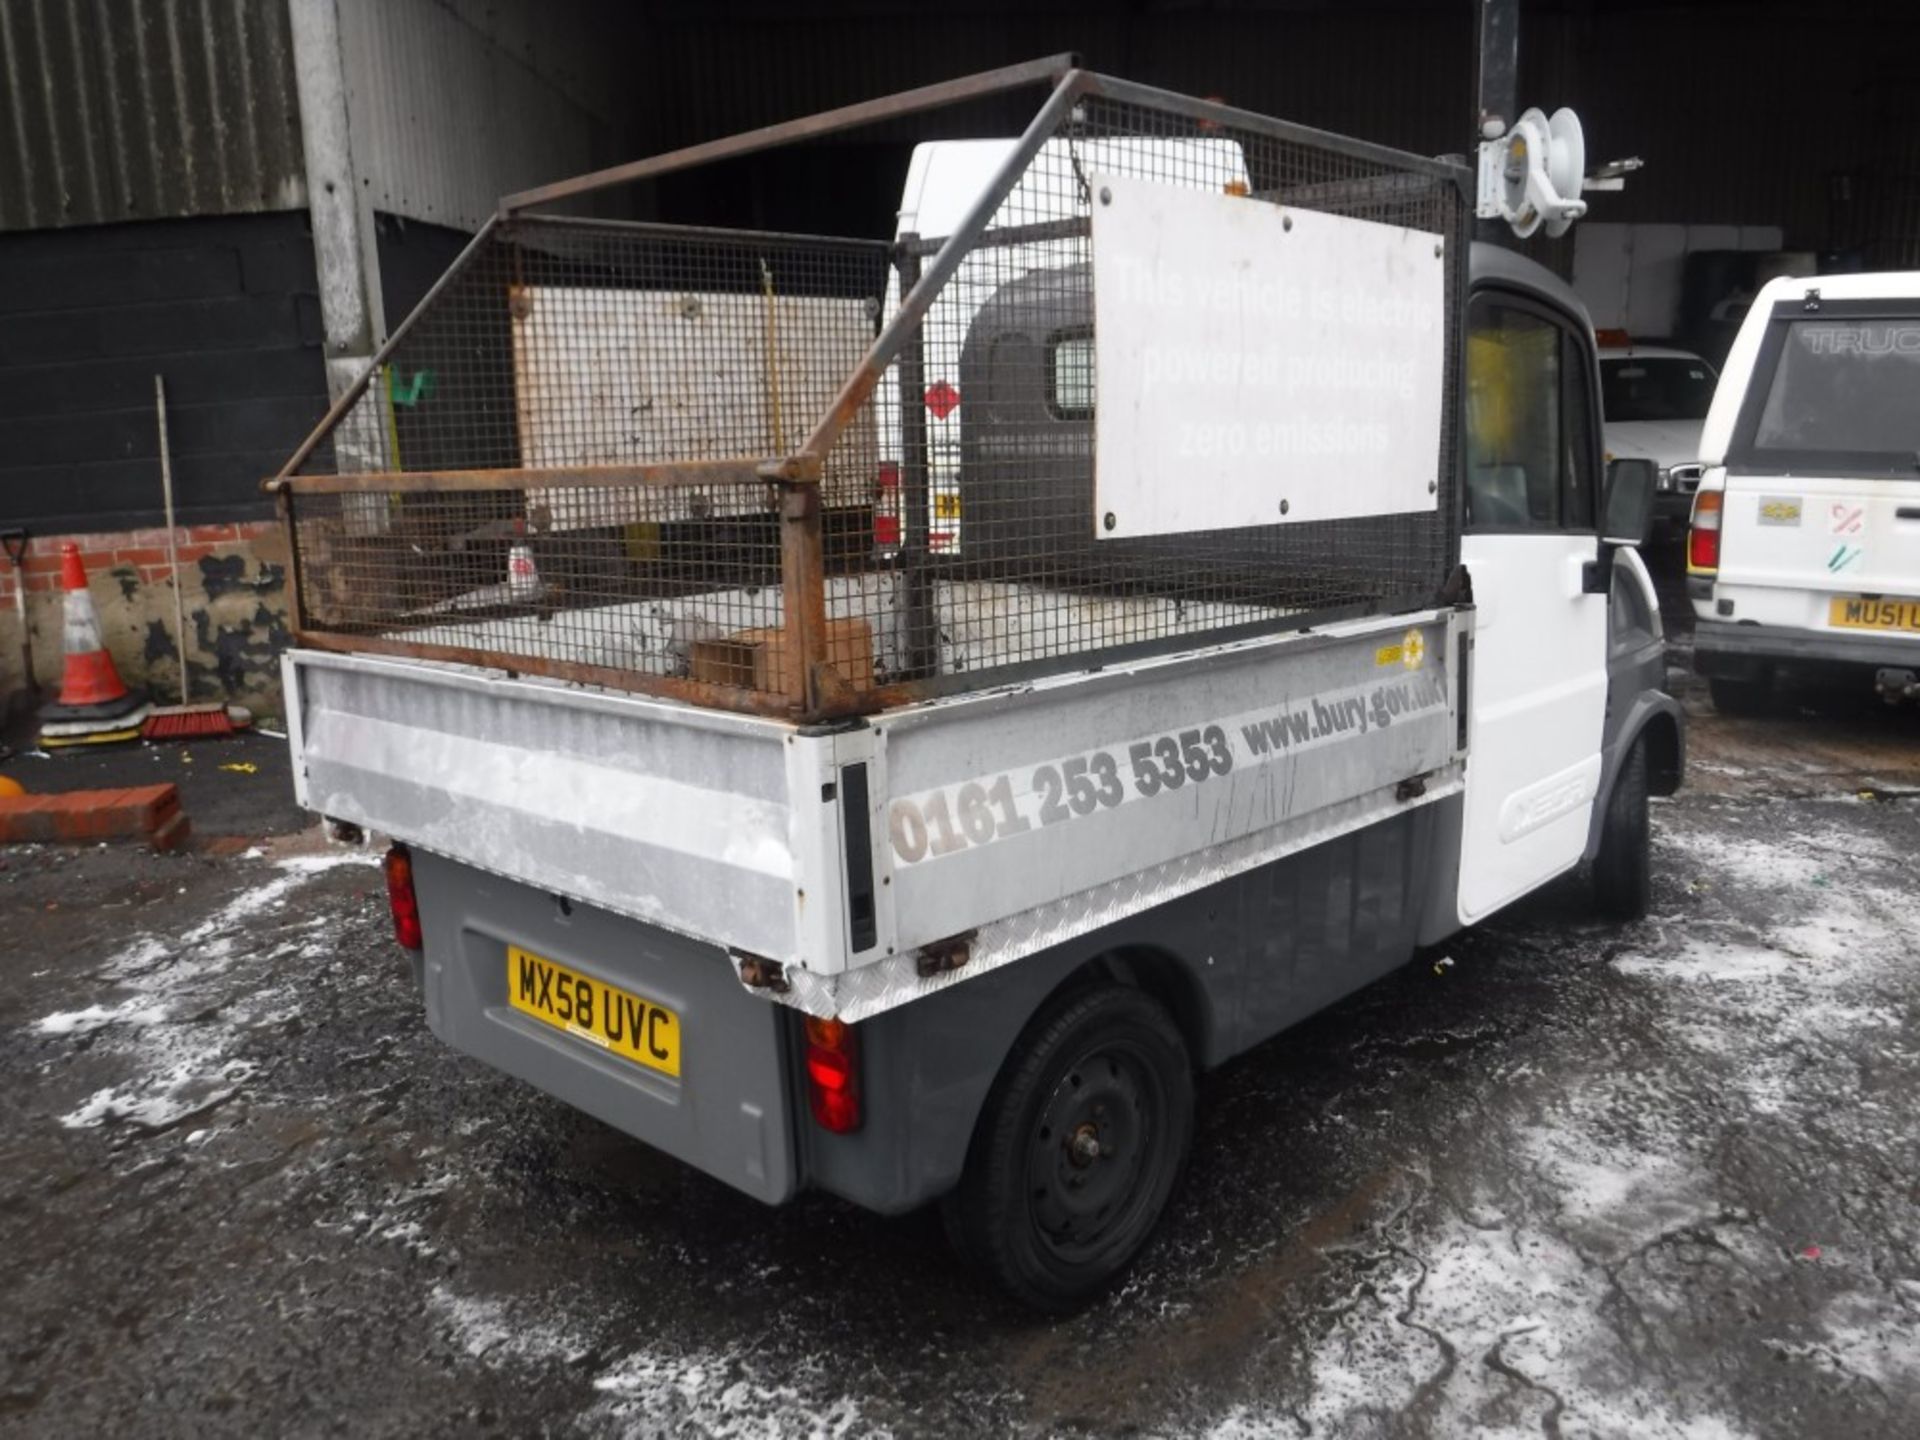 58 reg AXIAM MEGA MULTITRUCK 600E ELECTRIC CAGED TIPPER (DIRECT COUNCIL) 1ST REG 12/08, 24298M - Image 4 of 5